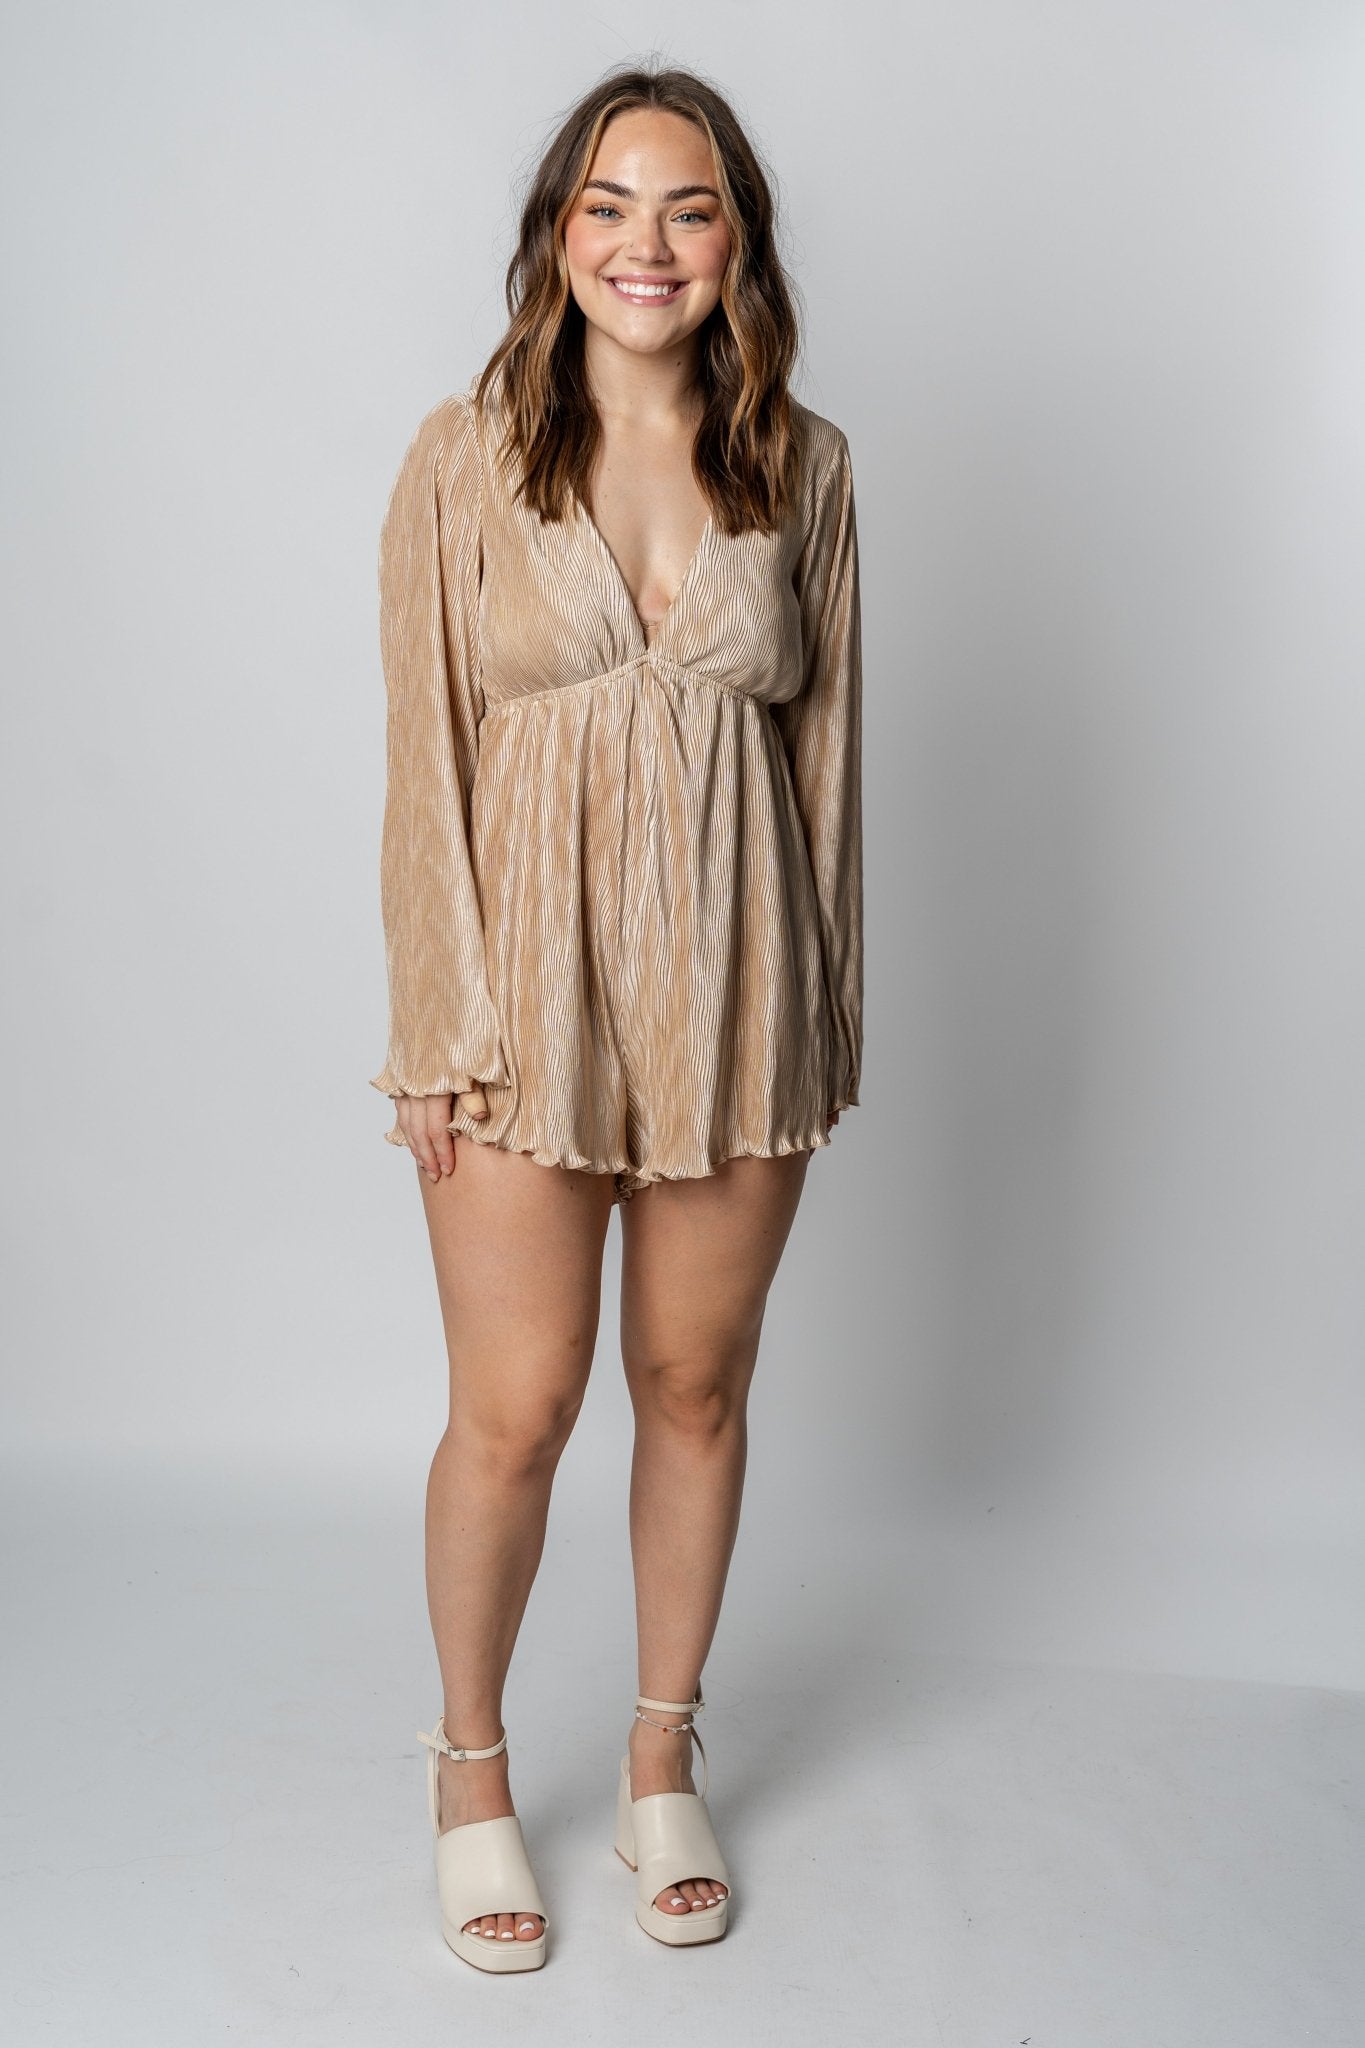 Bell sleeve pleated romper taupe - Trendy Romper - Fashion Rompers & Pantsuits at Lush Fashion Lounge Boutique in Oklahoma City